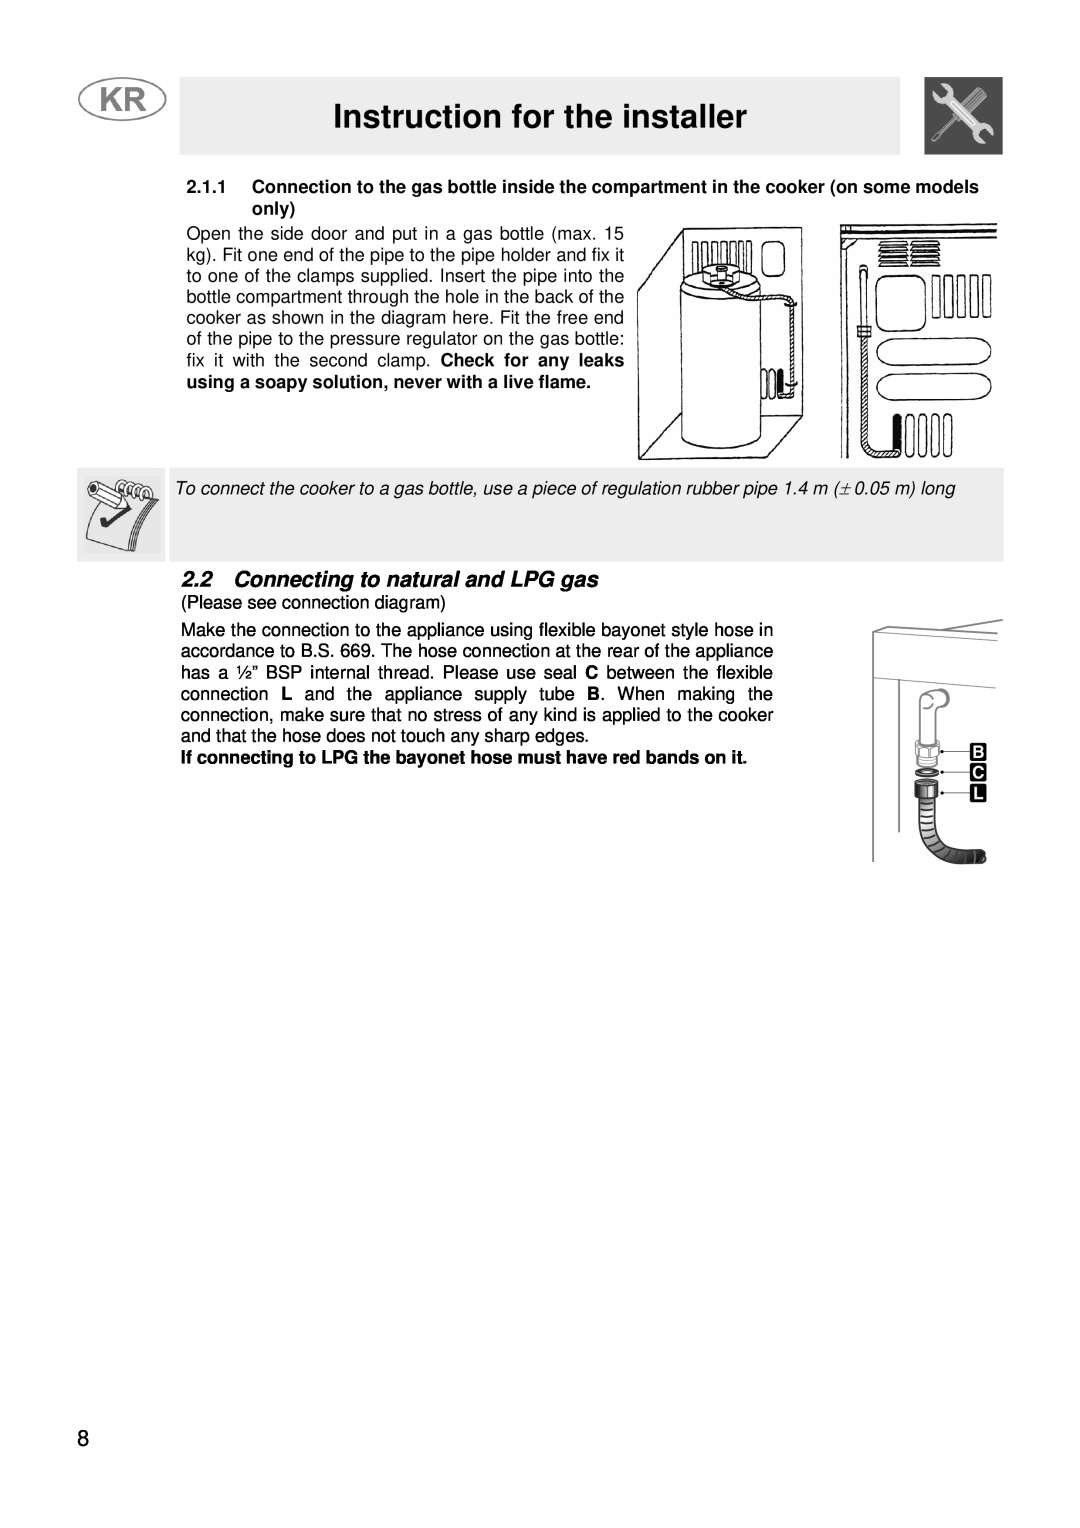 Smeg JGFC34SKB manual 2.2Connecting to natural and LPG gas, Instruction for the installer 